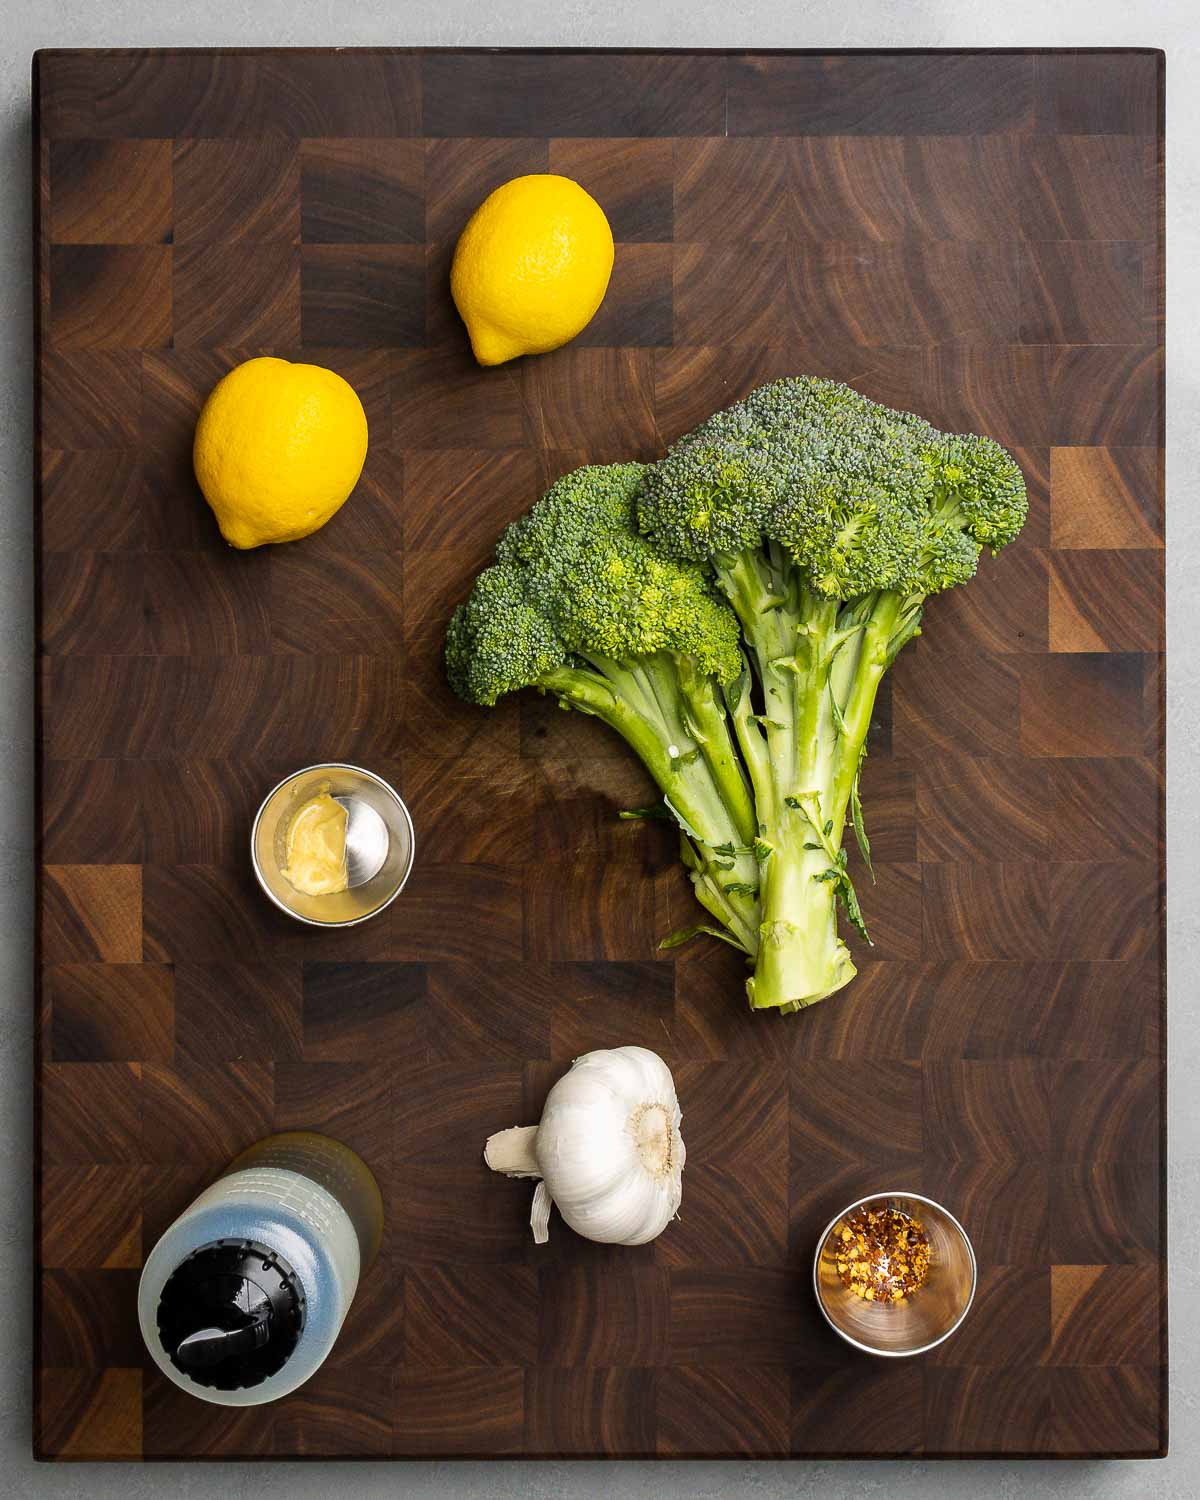 Ingredients shown: lemons, broccoli, Dijon mustard, extra virgin olive oil, garlic, and hot red pepper flakes.